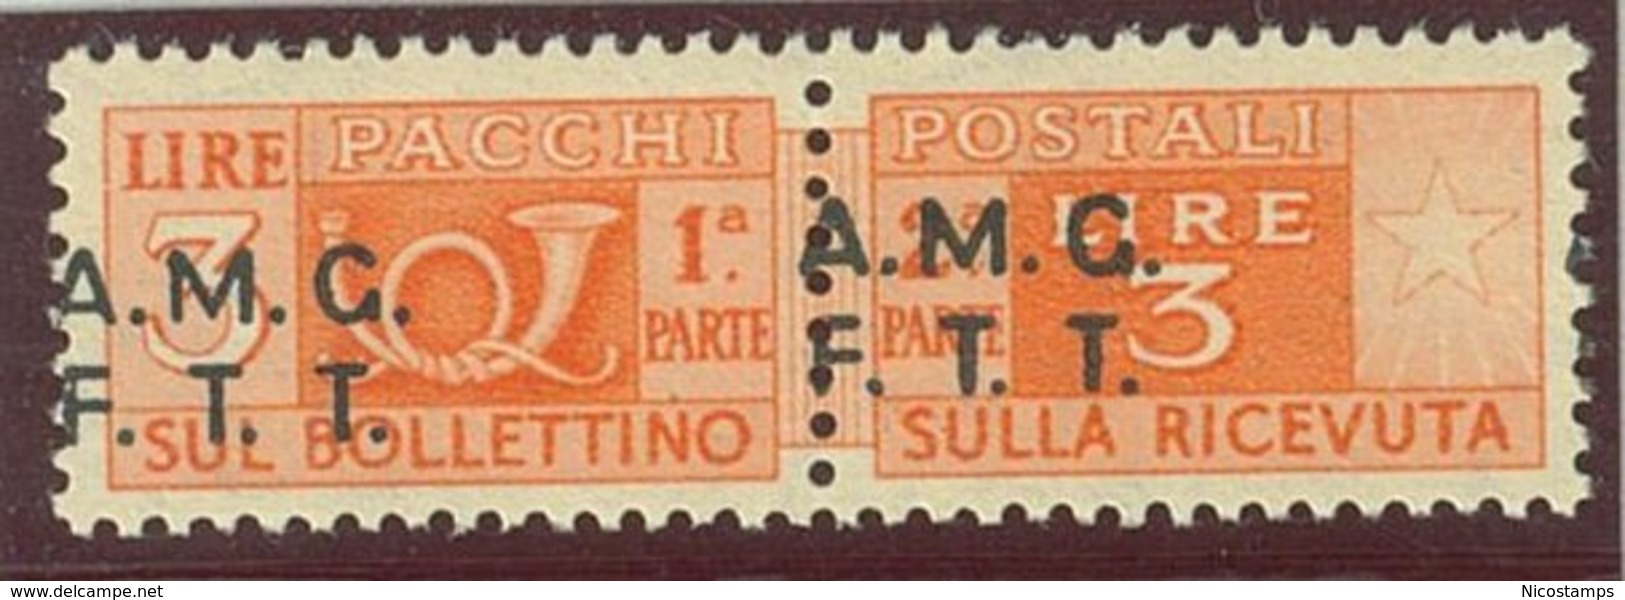 TRIESTE A.M.G.-F.T.T. SASS. P.P. 3gb  NUOVO - Postal And Consigned Parcels